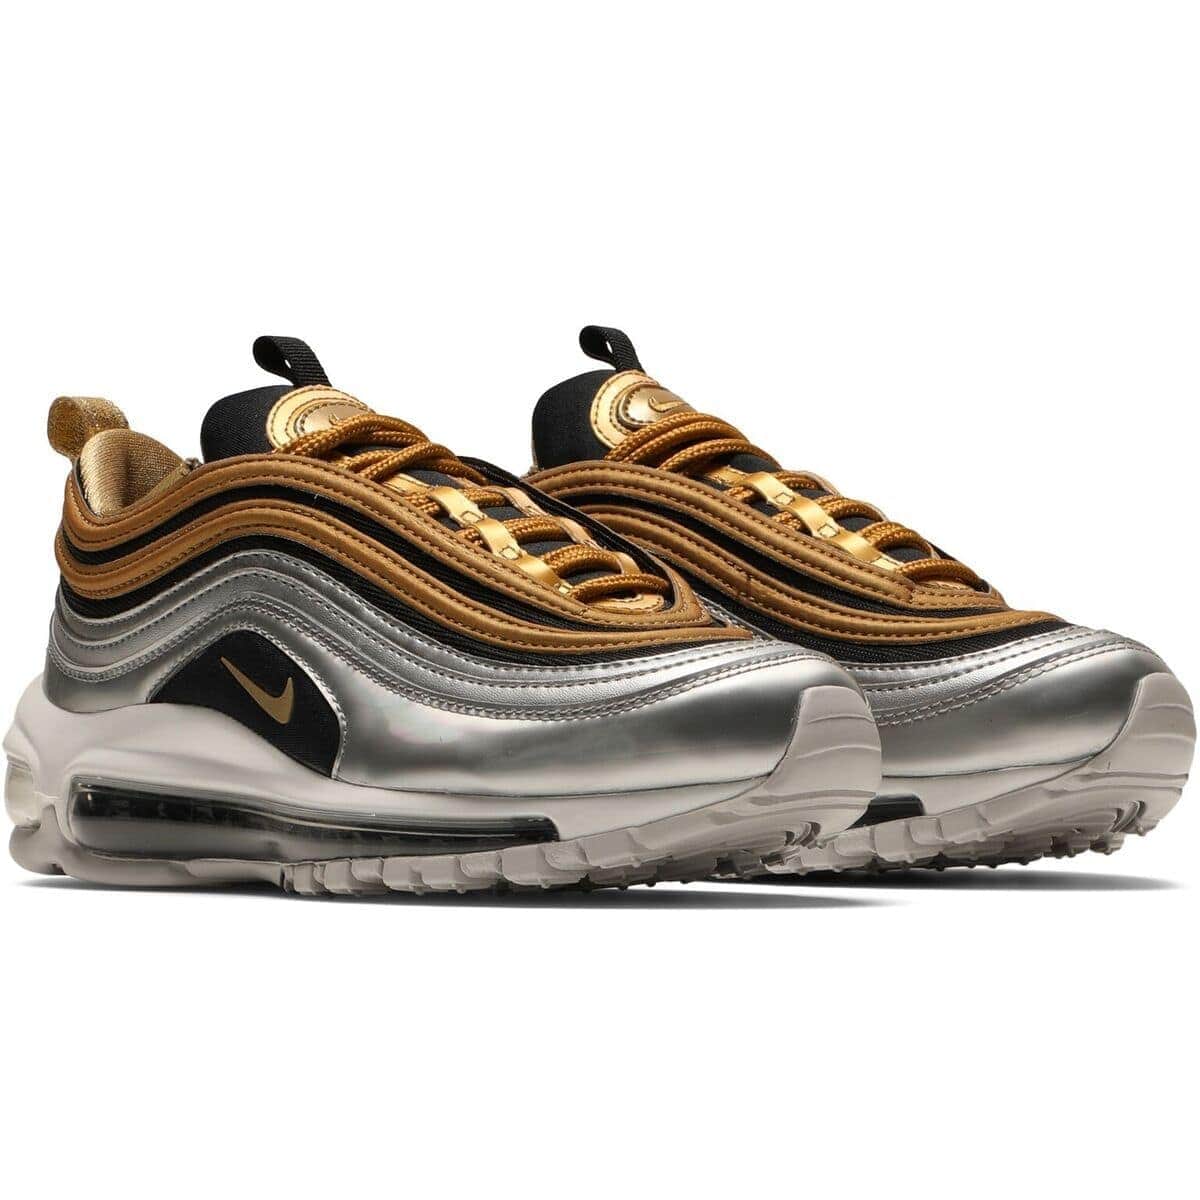 AIR MAX 97 SPECIAL EDITION (neon nike men for sale on the beach on line)[AQ4137 - 700] – GmarShops - nike air flow magenta for sale owner